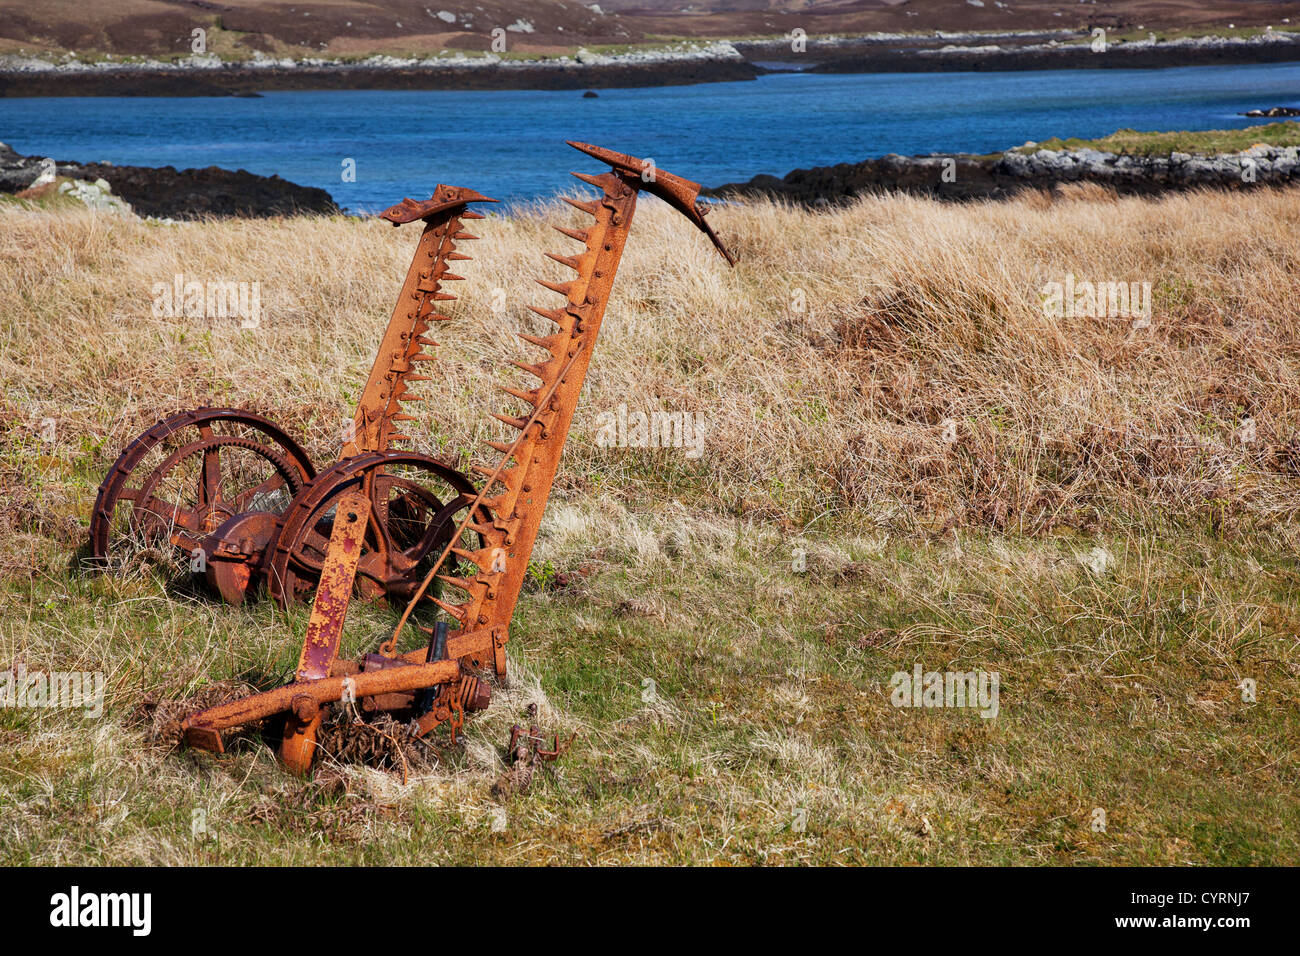 Abandoned rusty old farm machinery at Flodaigh on Benbecular, Outer Hebrides, Scotland, UK Stock Photo